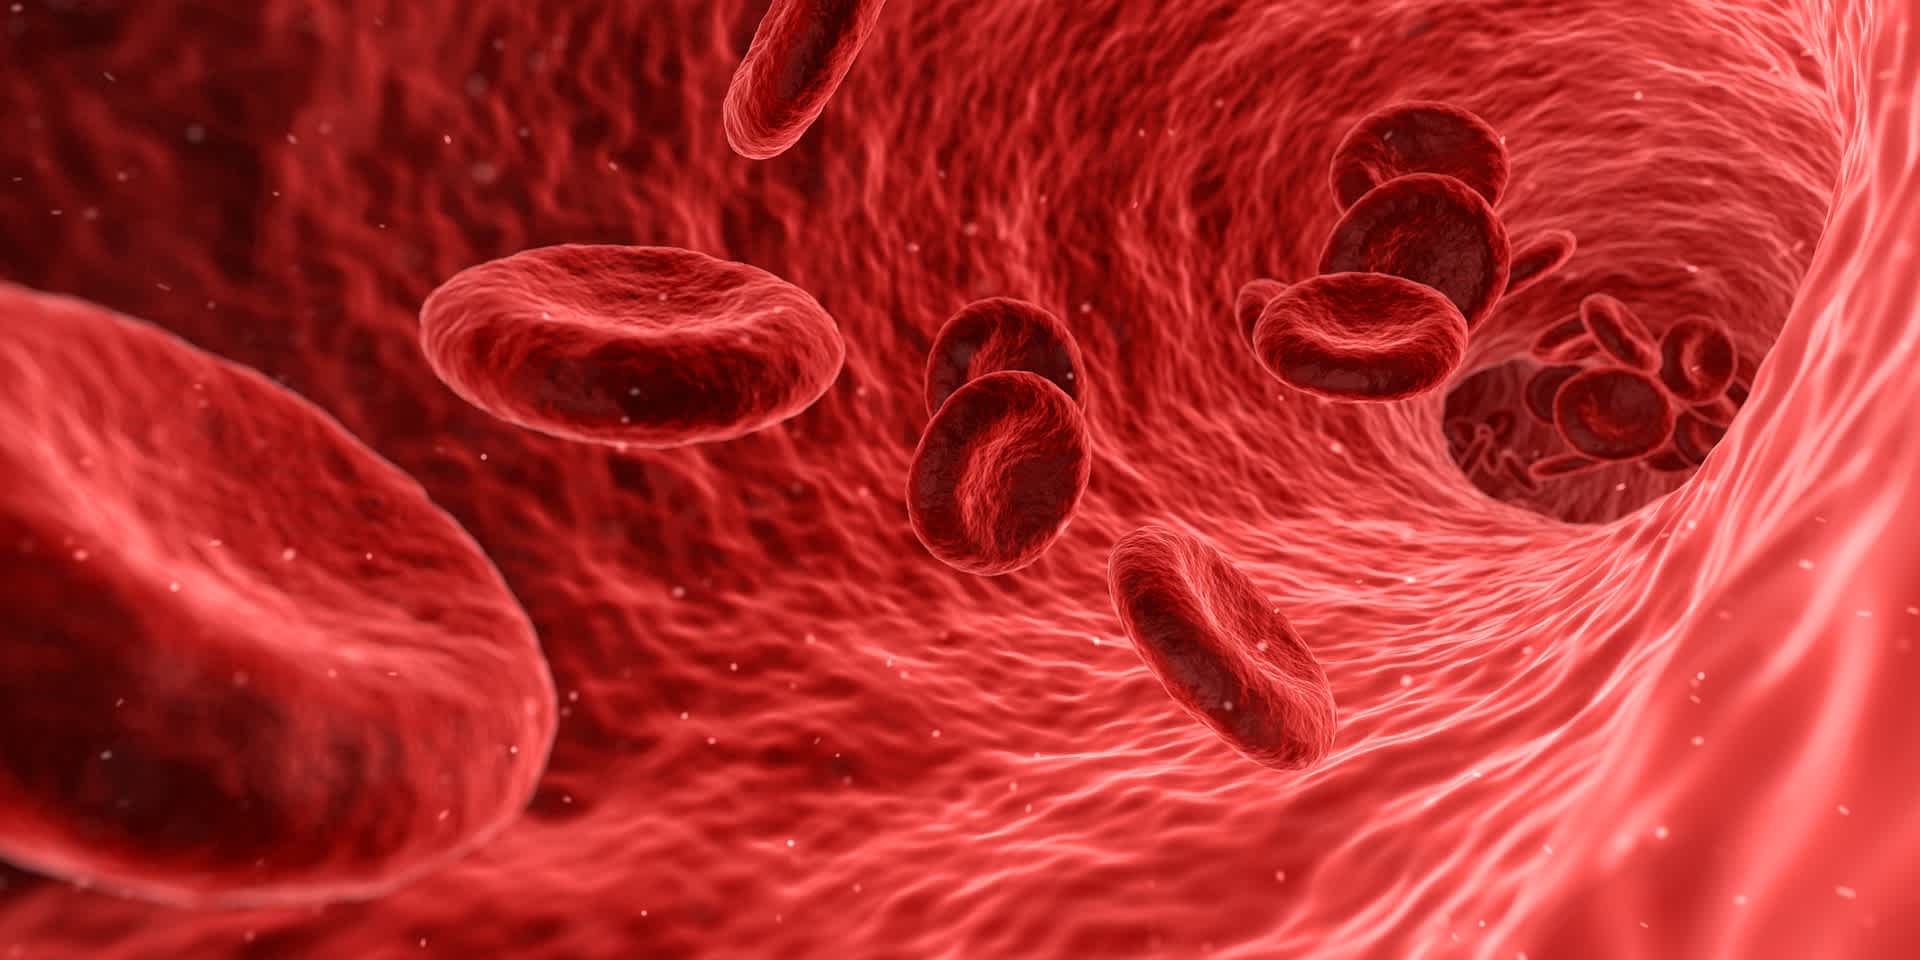 Illustration of red blood cells which can be affected by iron deficiency anemia